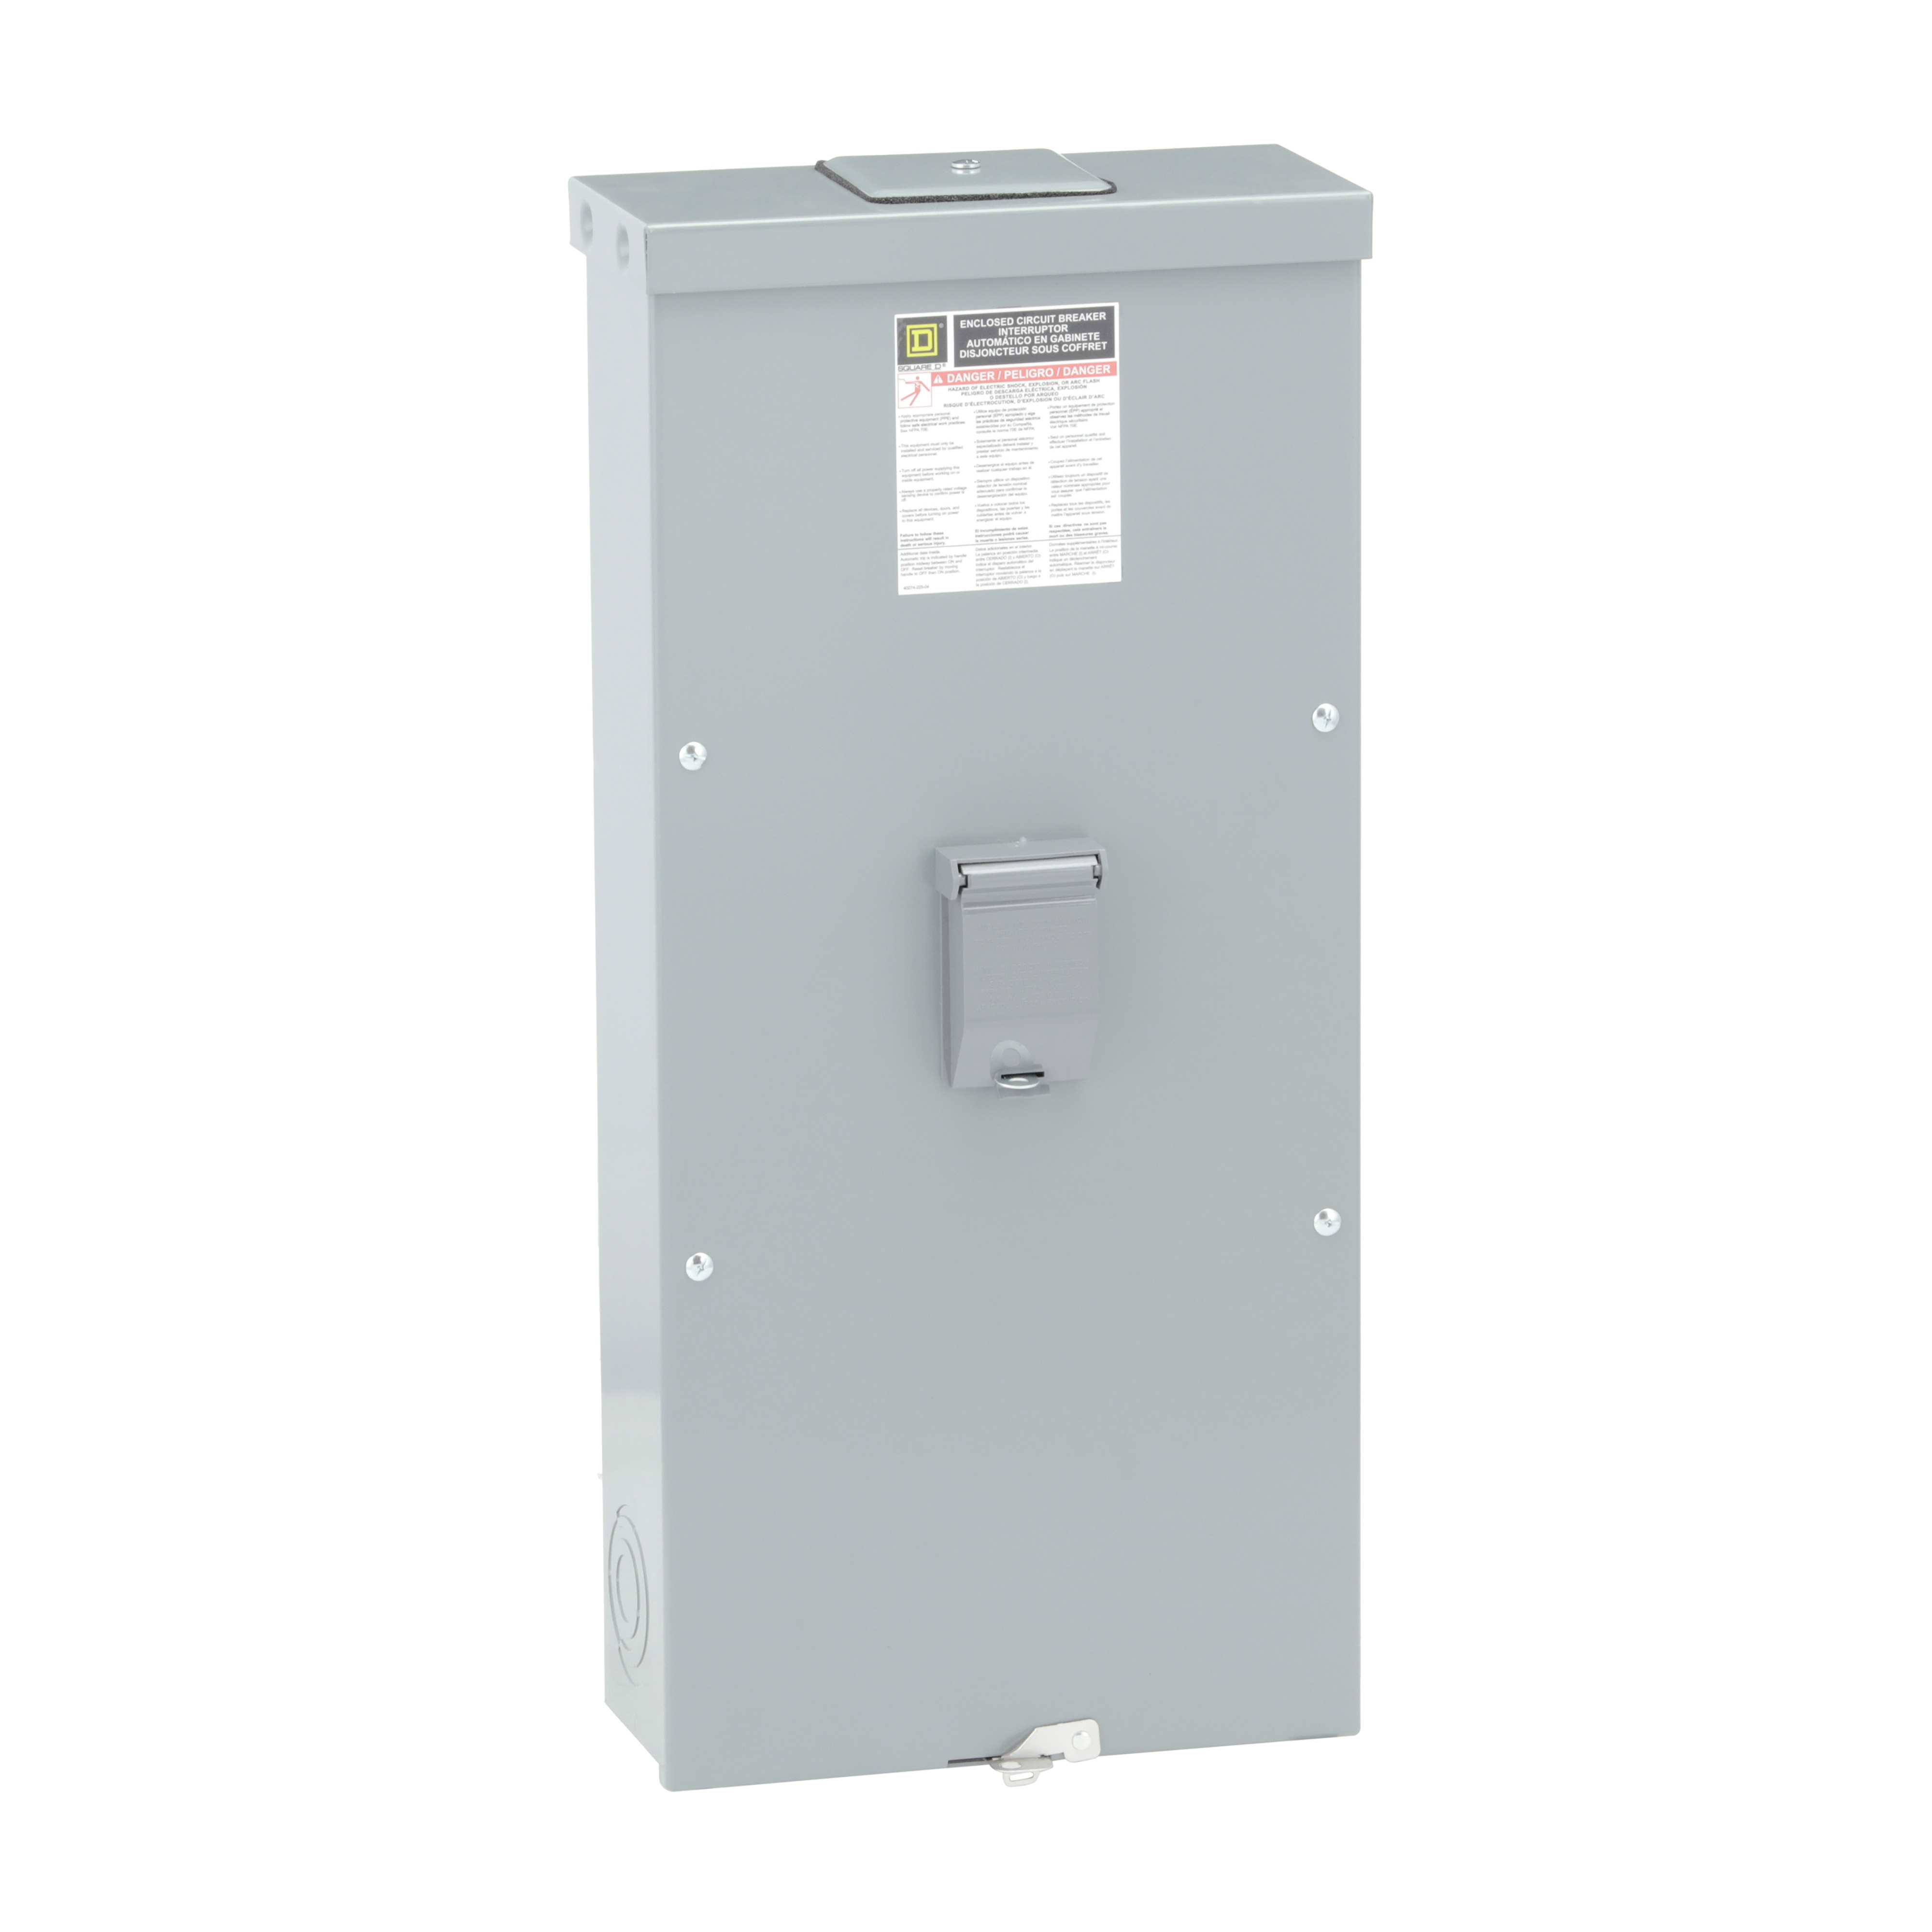 Circuit breaker enclosure, PowerPacT H/J, 15A to 250A, NEMA 3R, 14.47in W x 31.05in H x 6.28in D